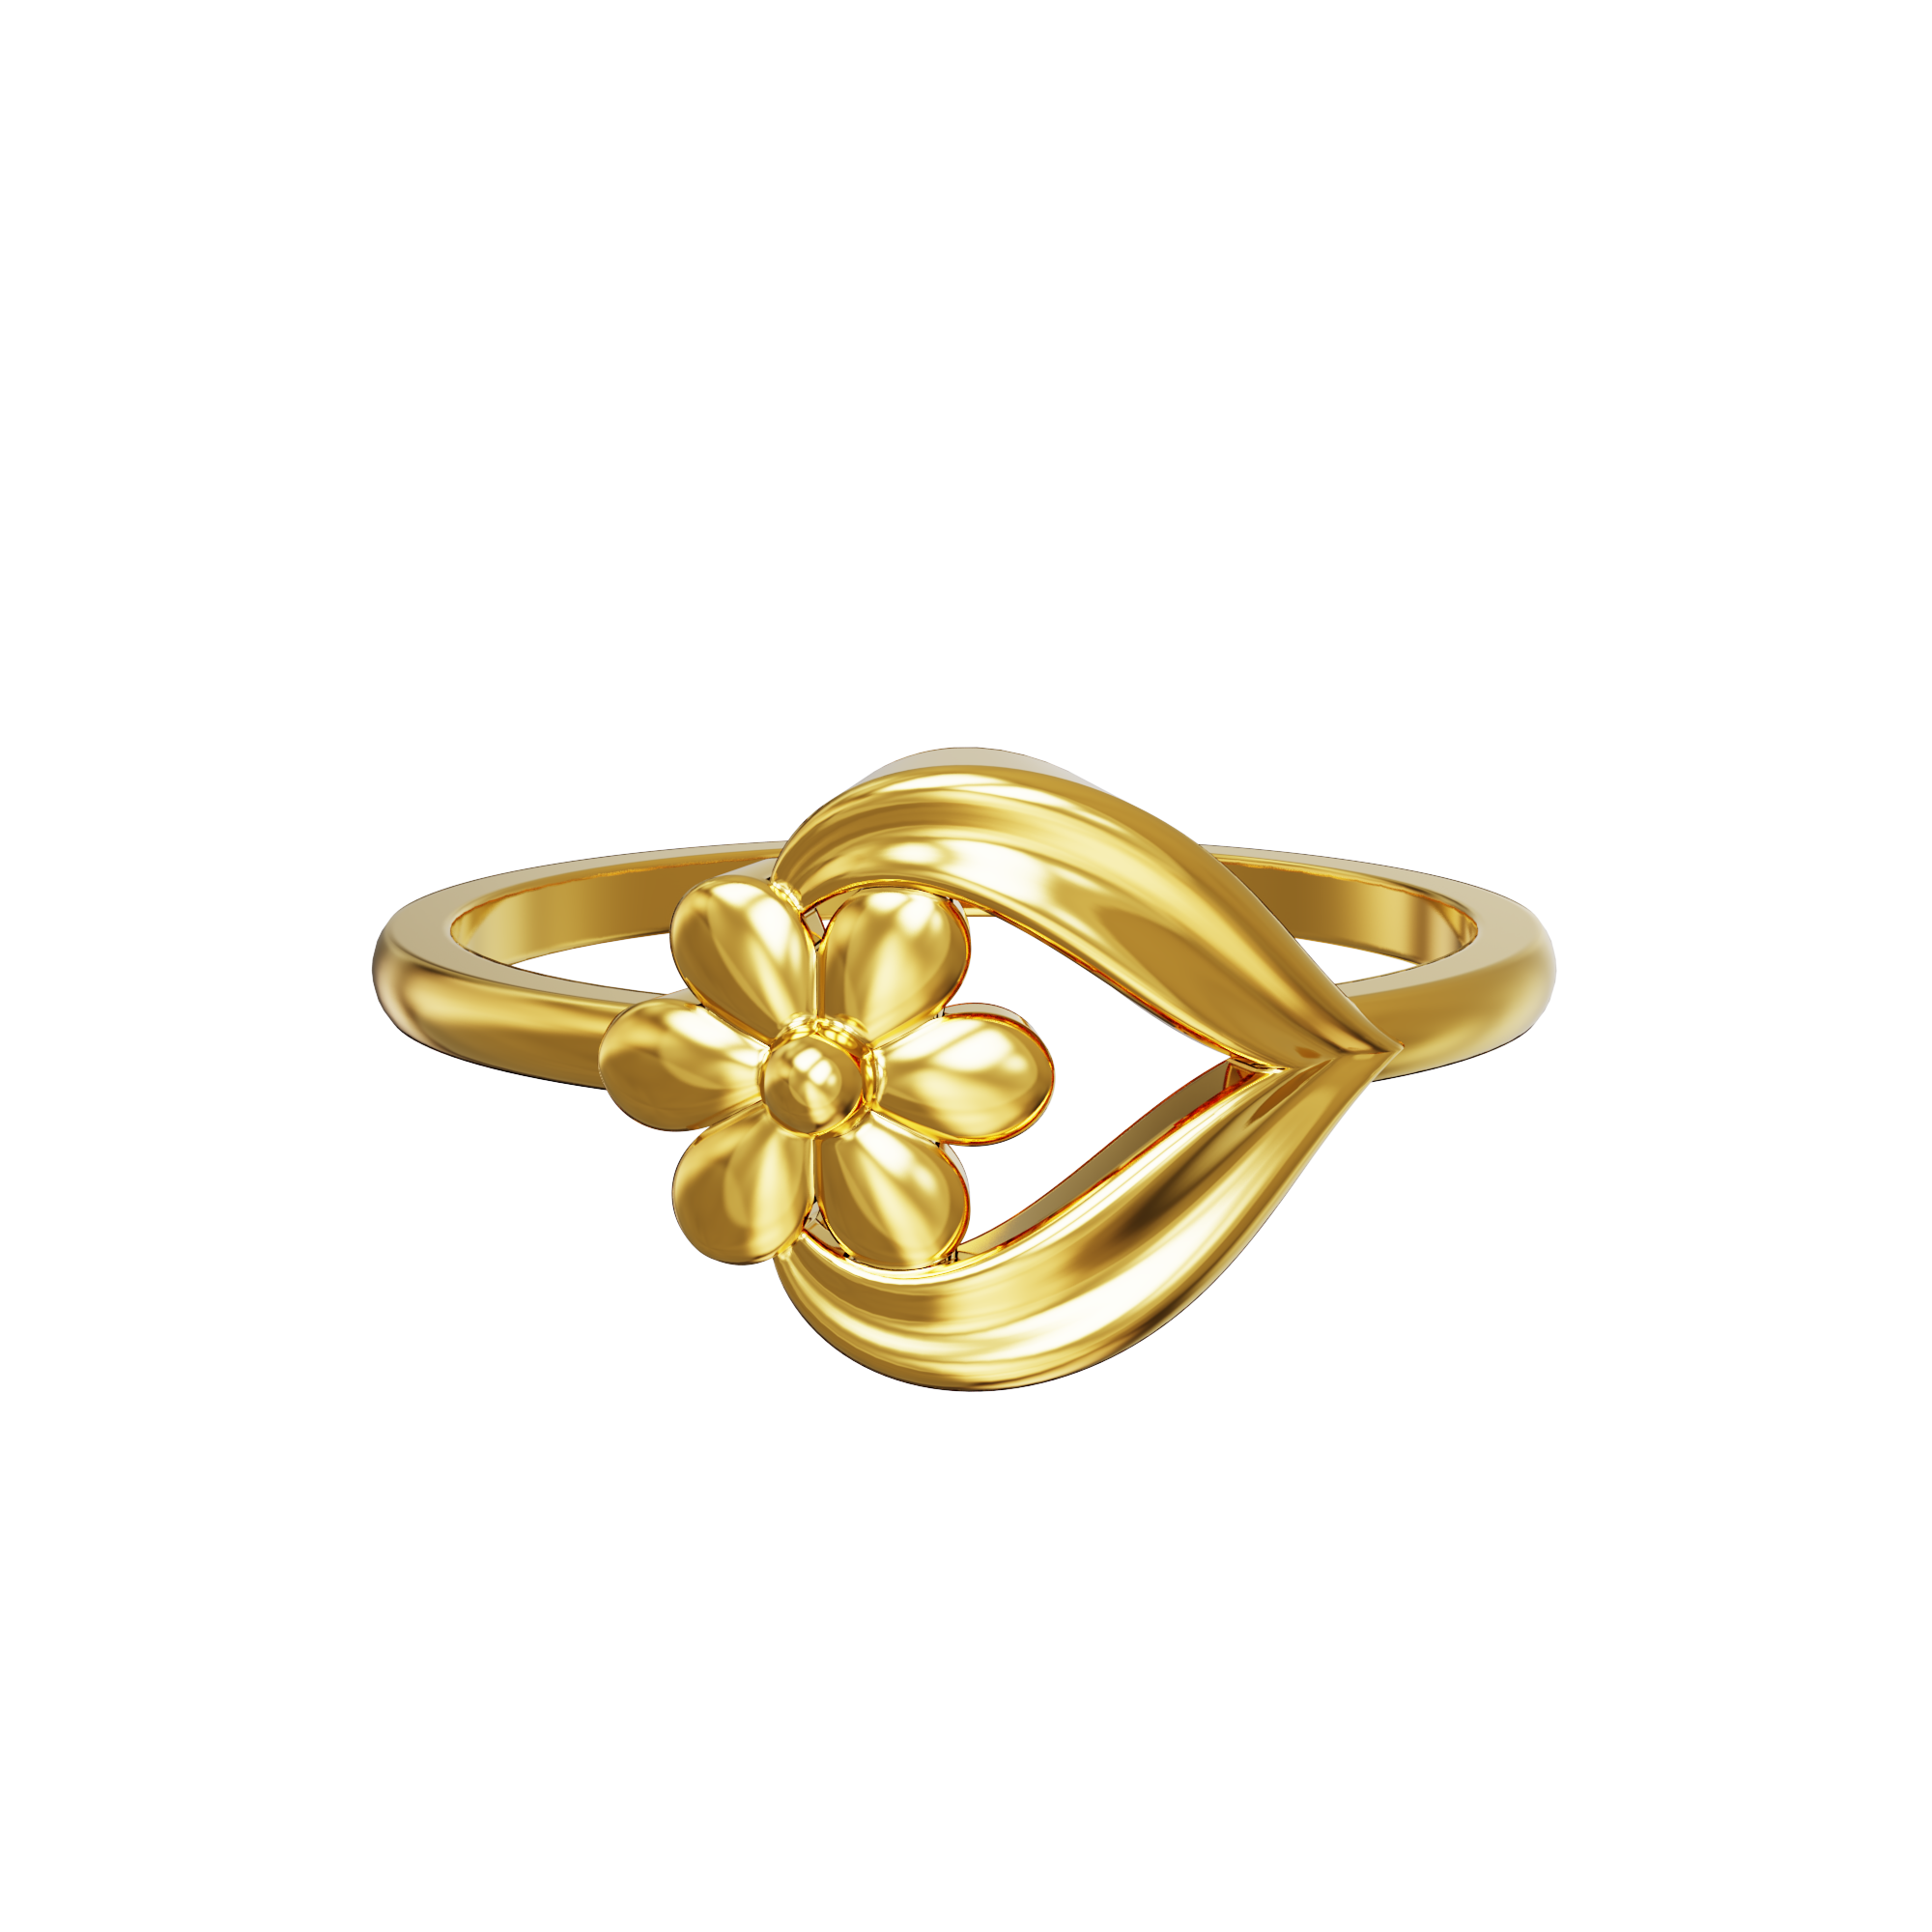 The Rebekha wedding Gold Ring For Women's – Welcome to Rani Alankar